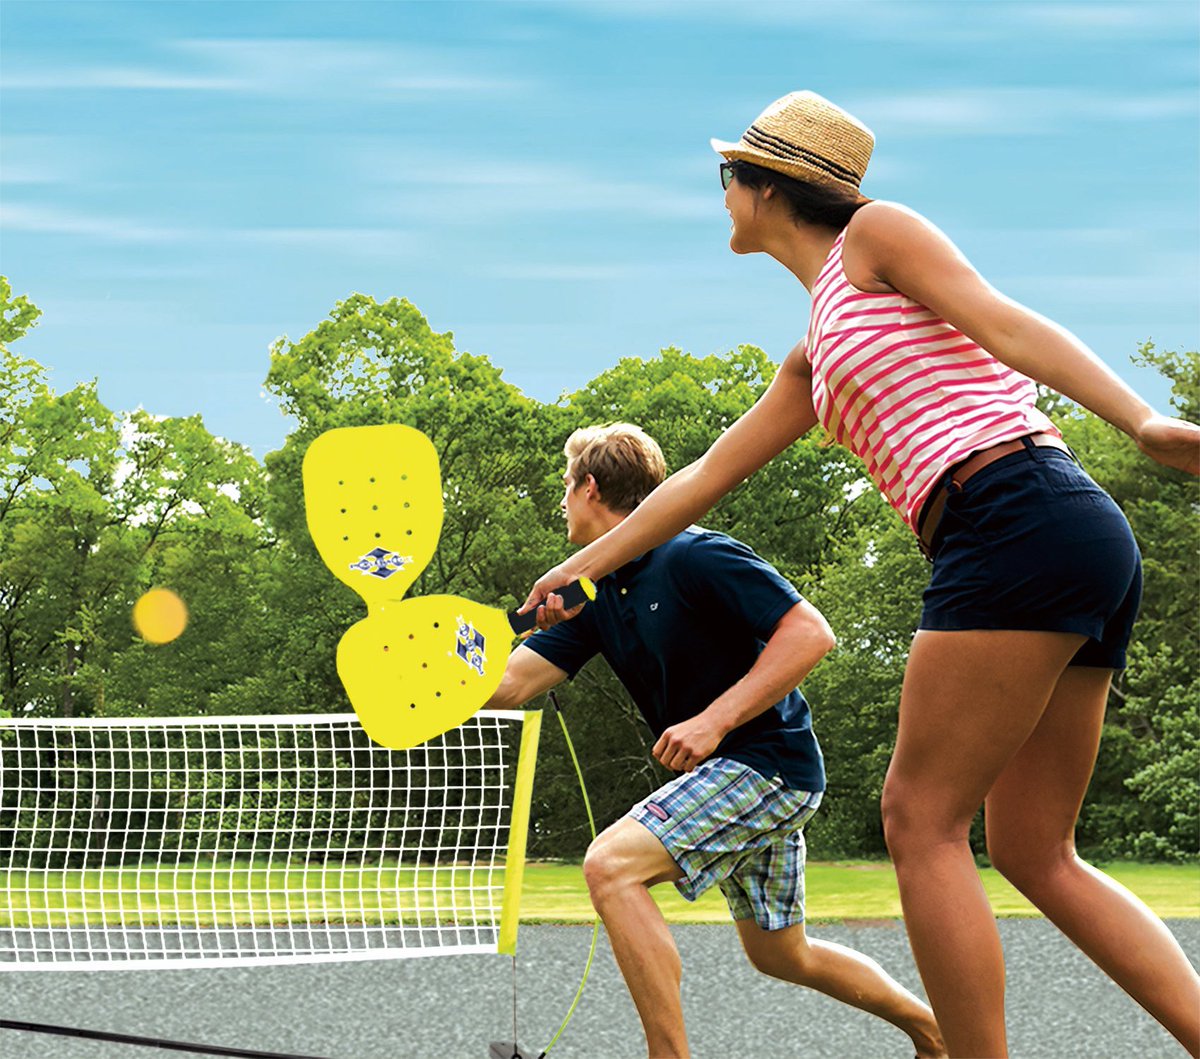 Sport can play with. Пиклбол. Indoor Sports Outdoor Sports. Pickleball Paddle. Пакмено бол.